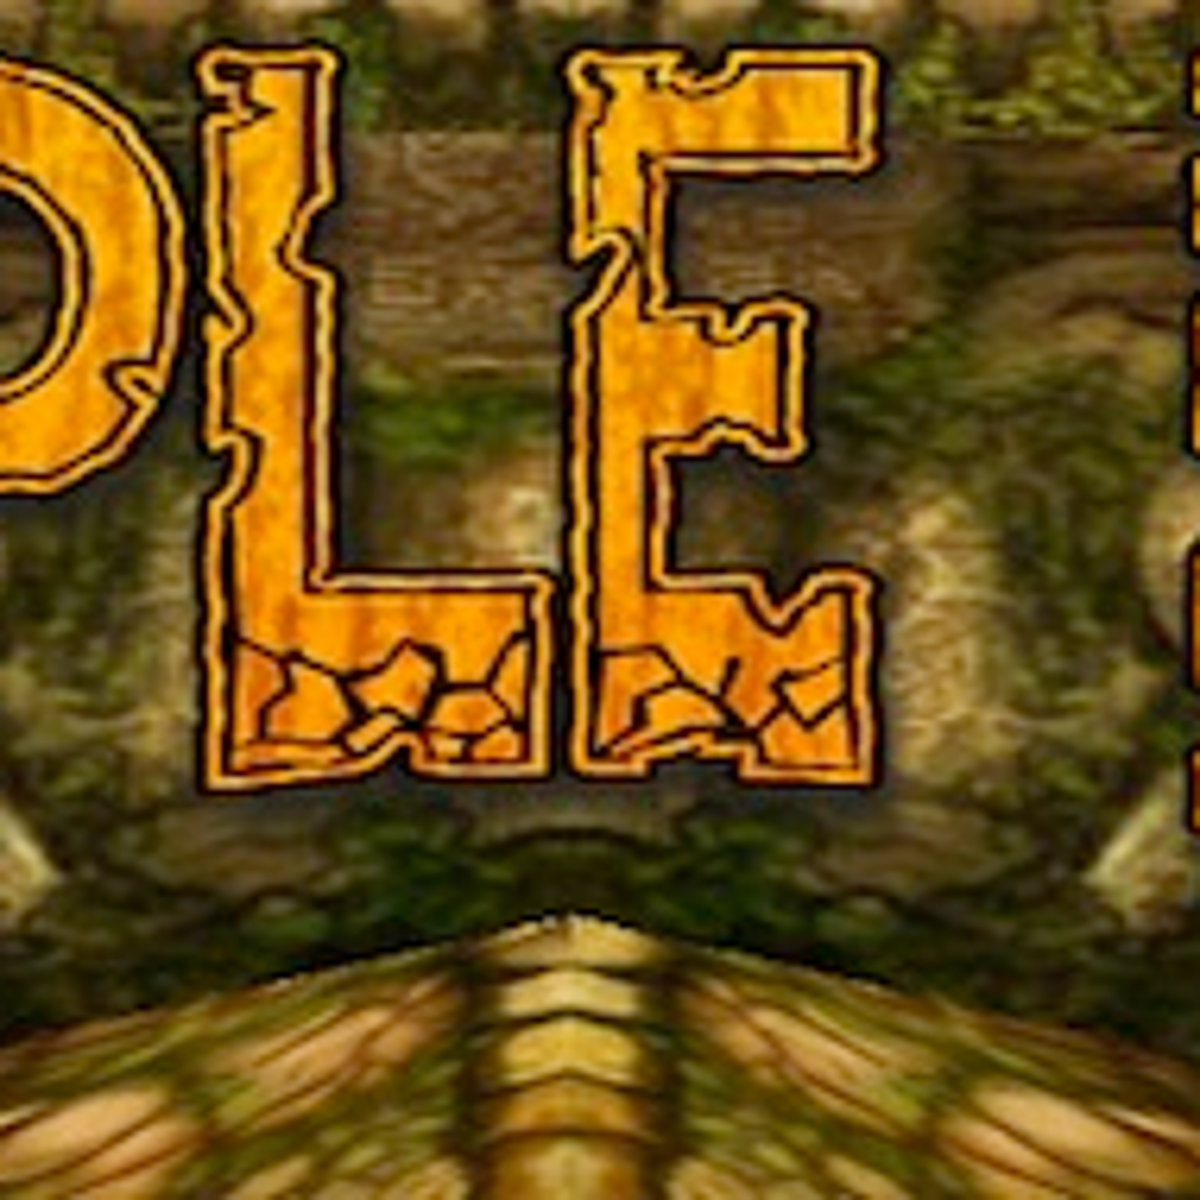 Temple Run 2 discovered, coming to iOS tomorrow - Polygon